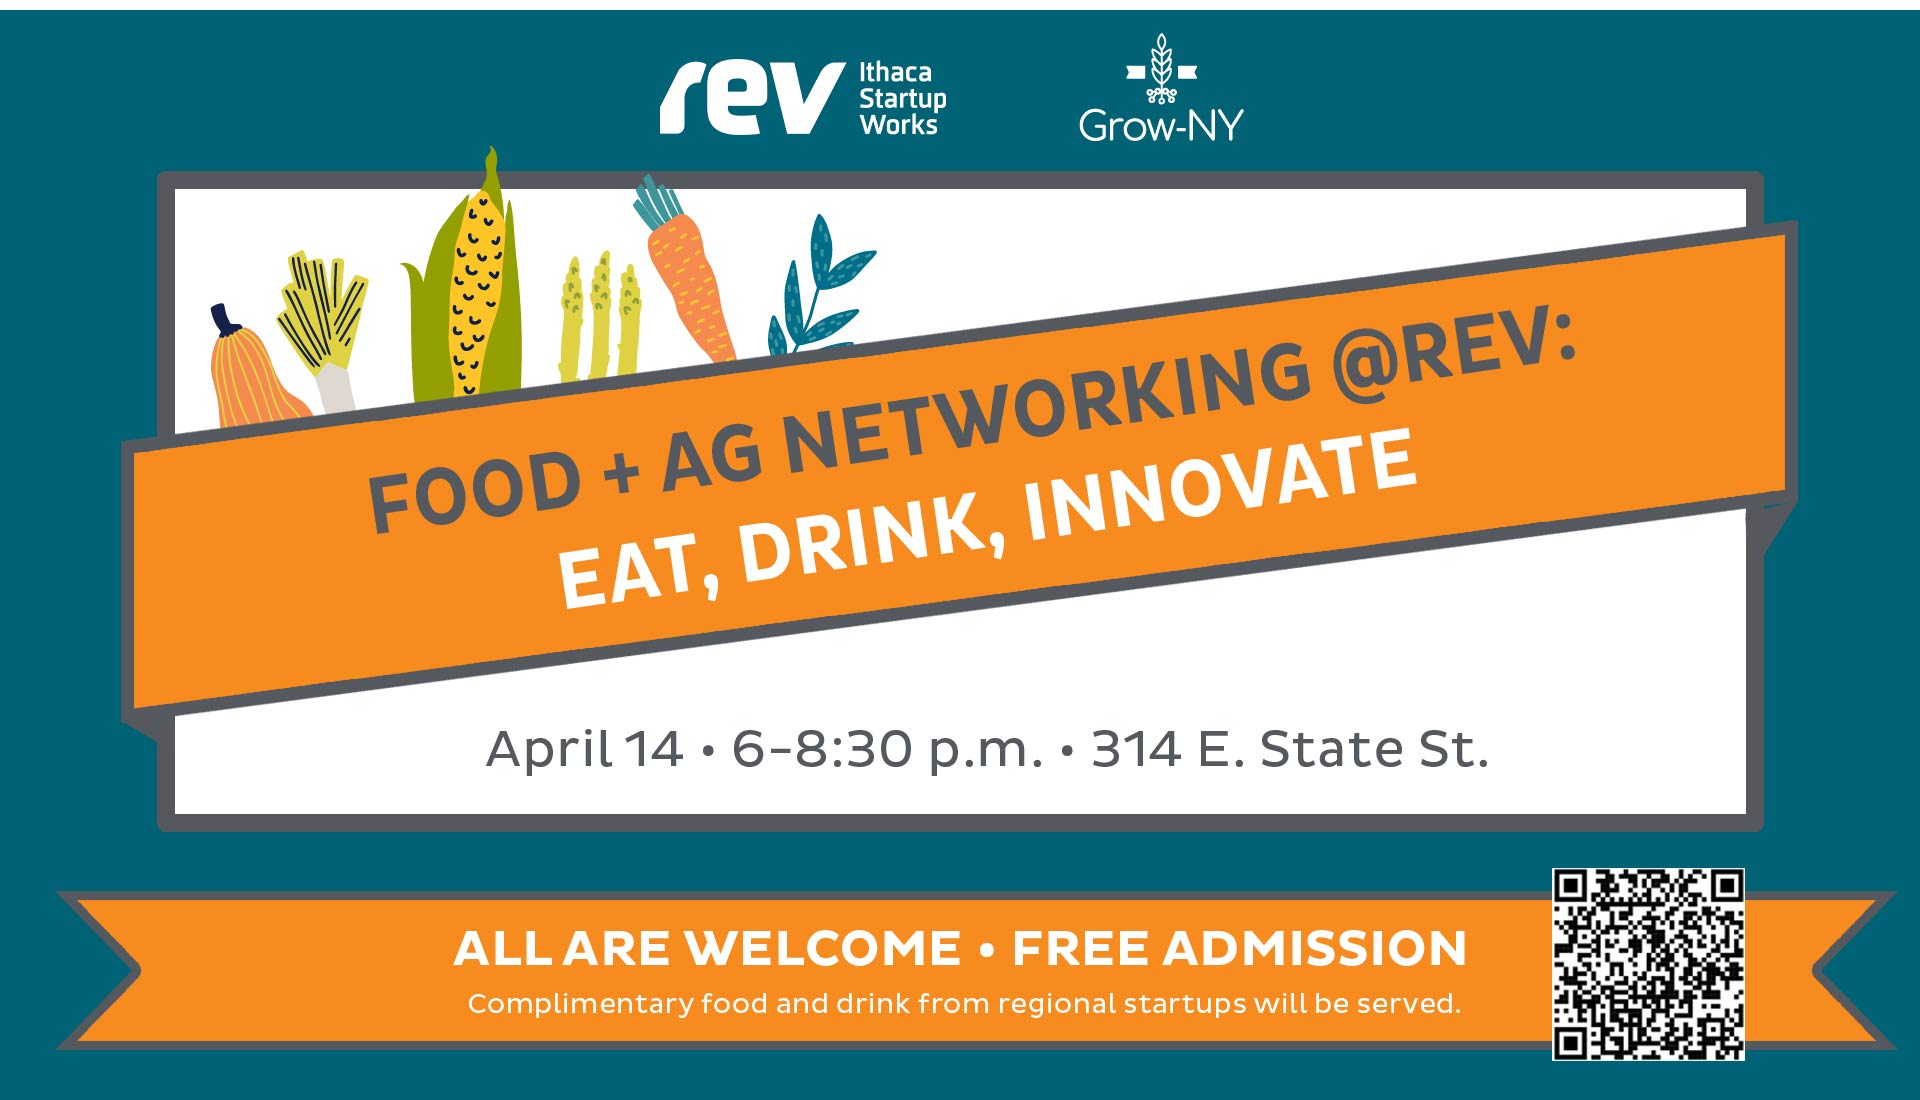 Rev: Ithaca Startup Works and Grow-NY logos. Food & Ag Networking@Rev: Eat, Drink, Innovate. April 14 6-8:30 pm ET. All are welcome. Free admission. Complimentary food and drinks from regional startups will be served.